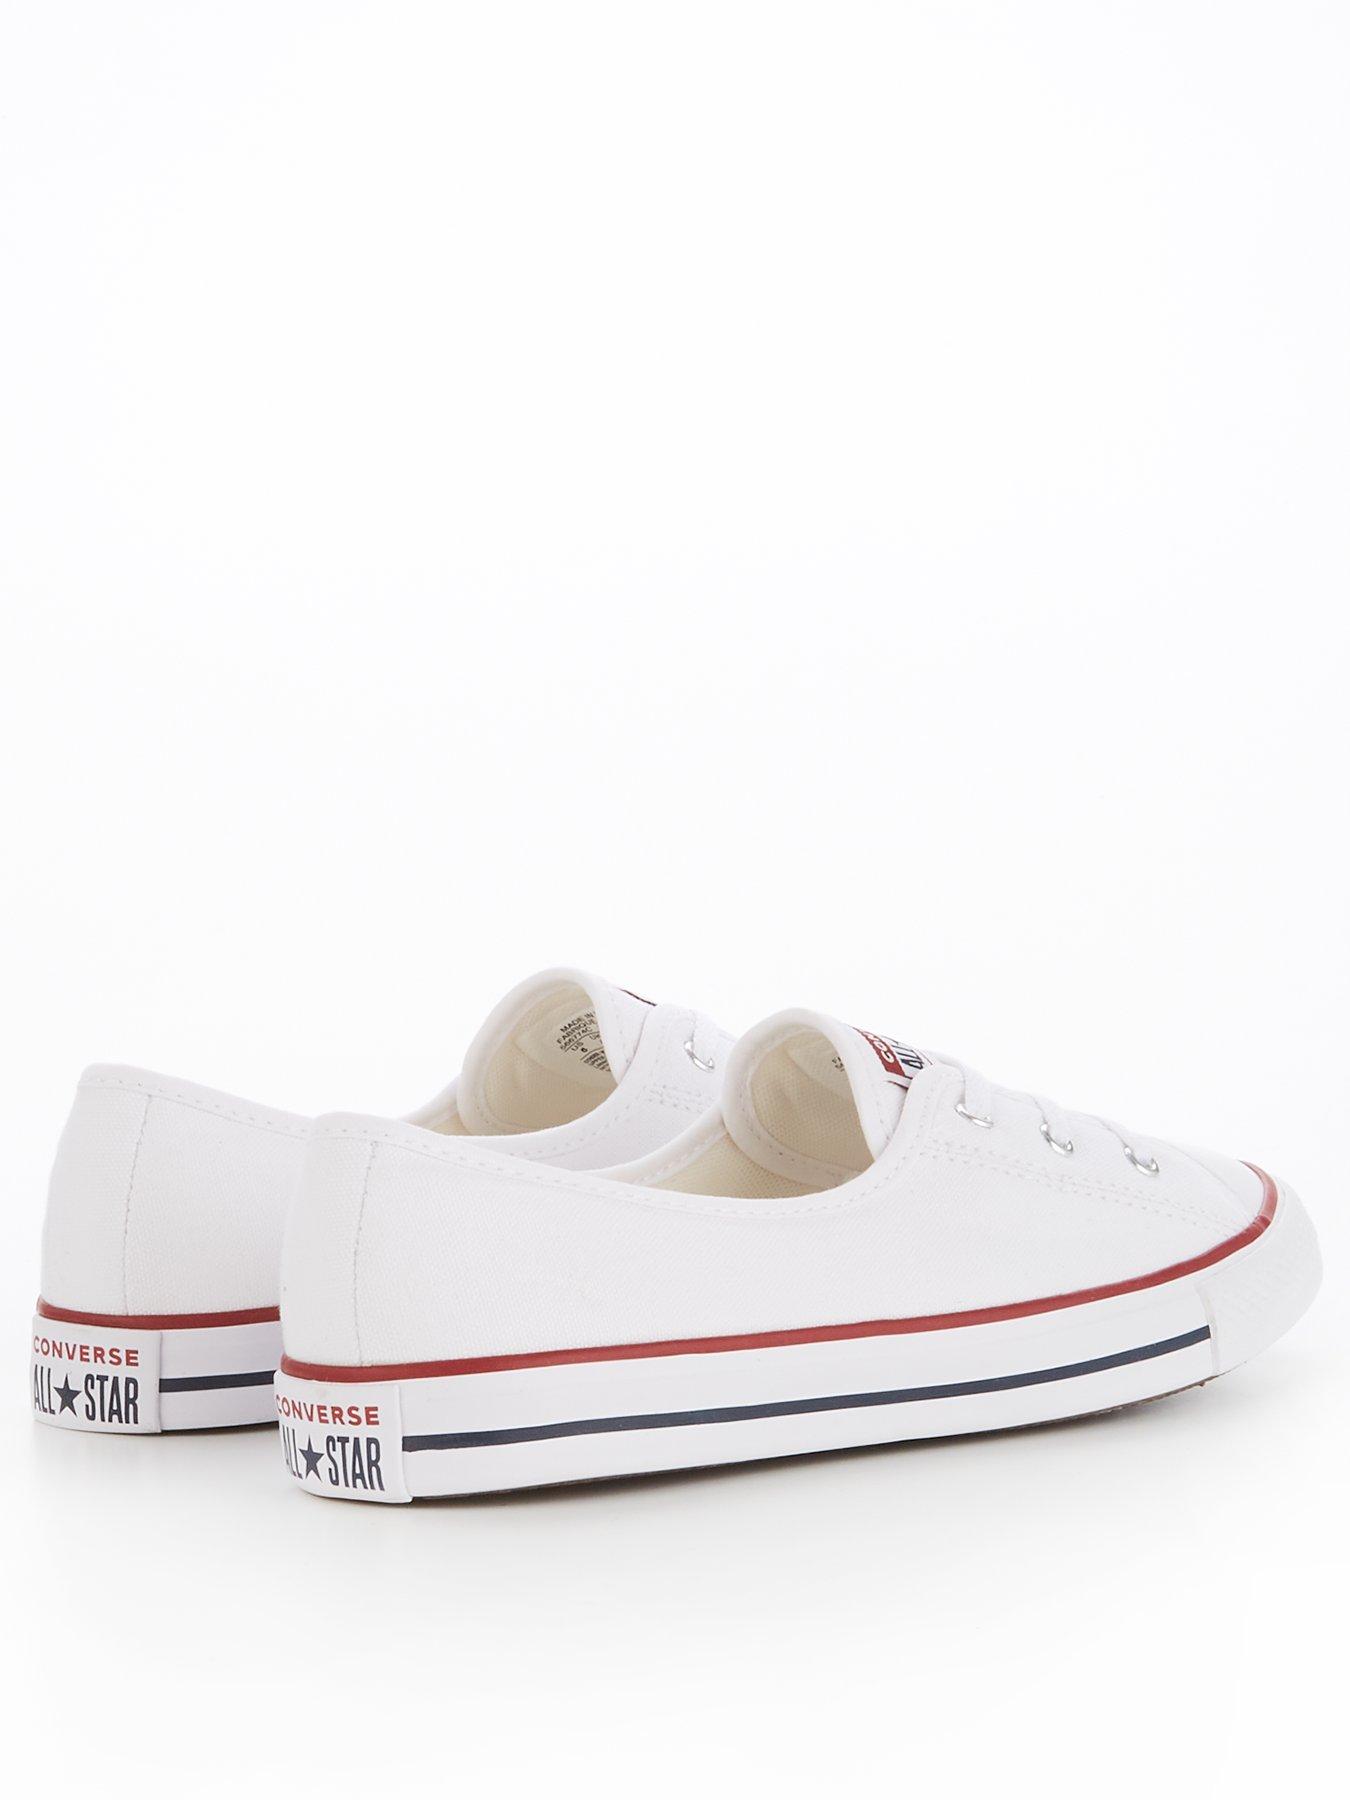 klog flyde over En nat Converse Chuck Taylor All Star Ballet Lace - White | very.co.uk